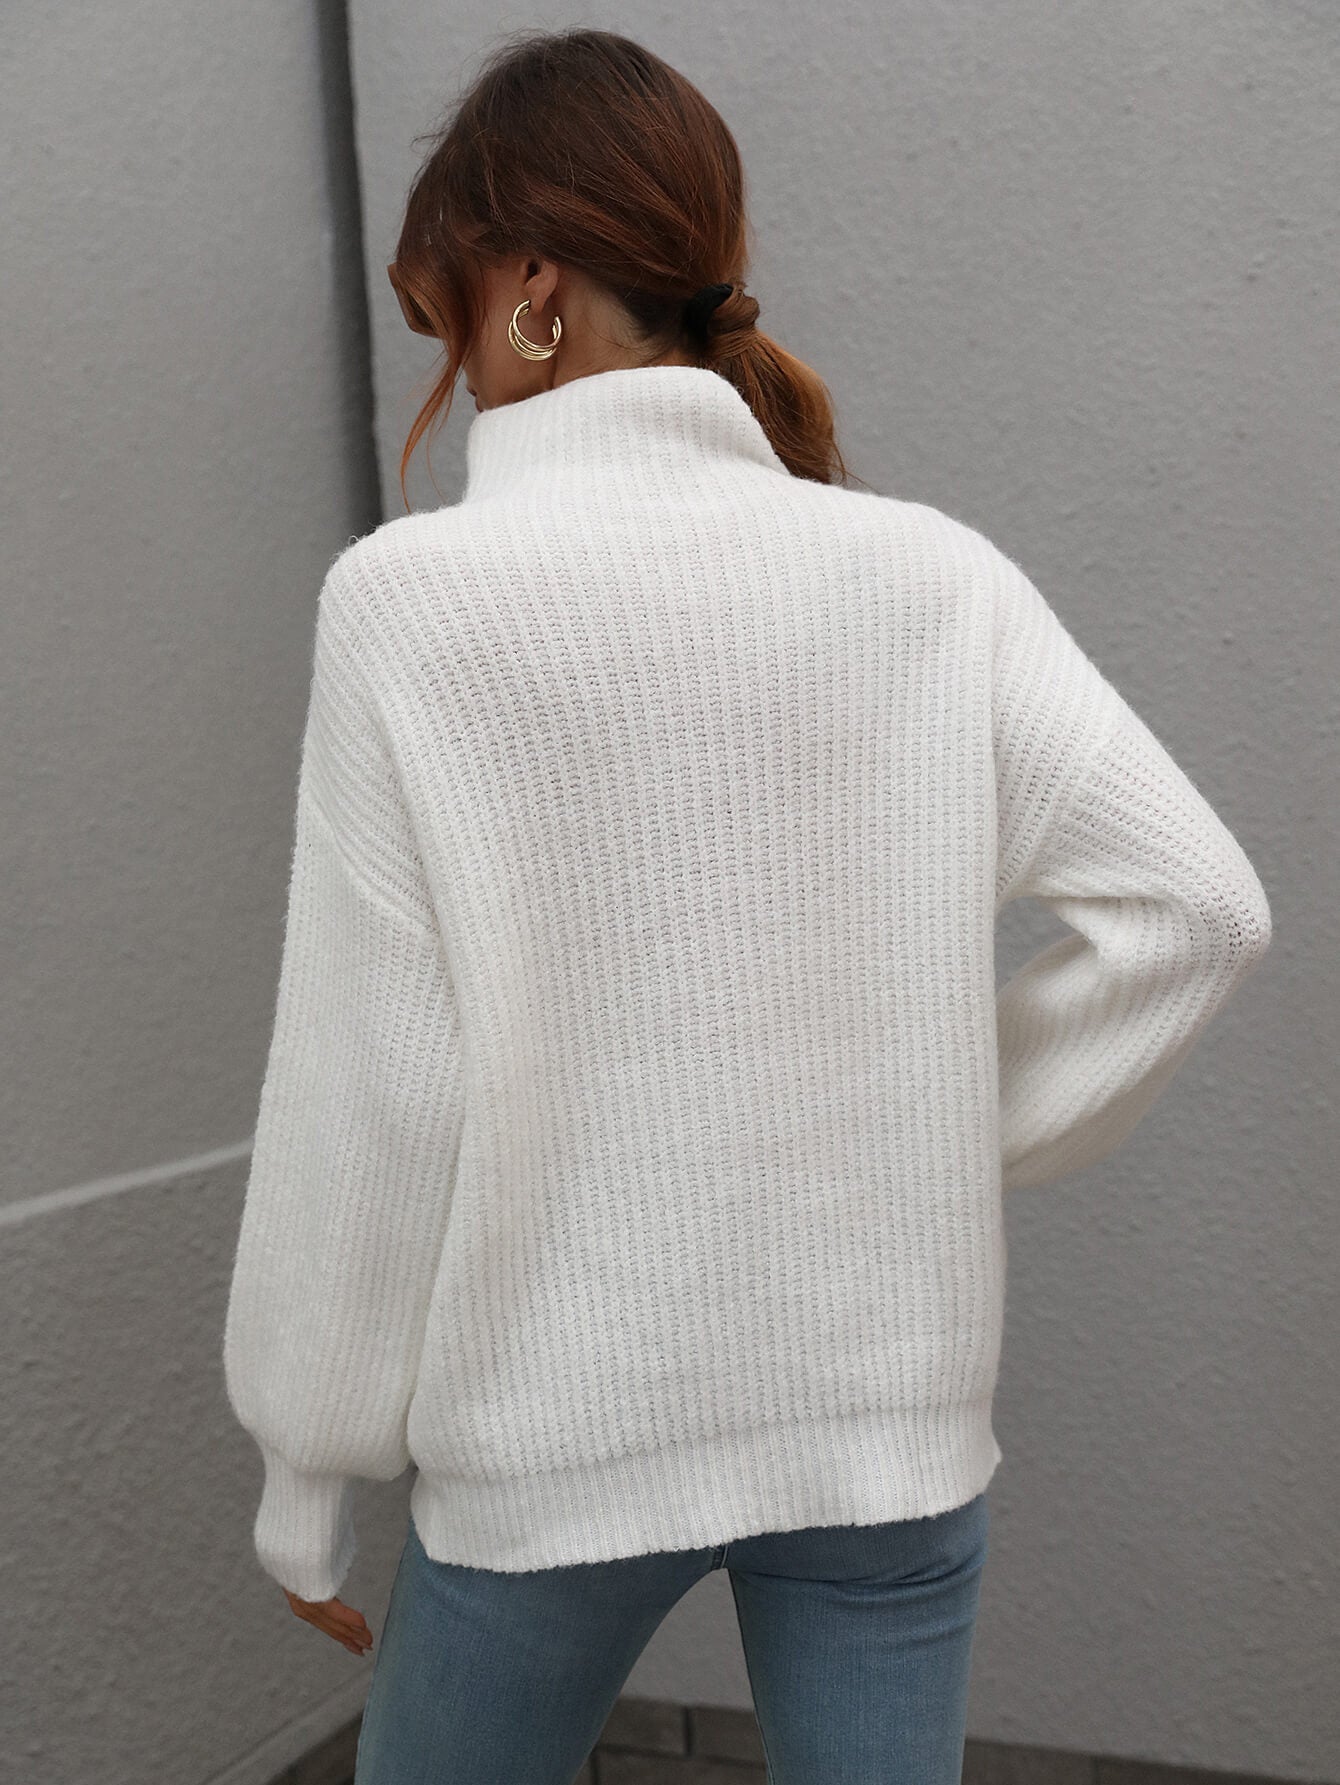 In The Thick Of It Rib-Knit Pullover Sweater in Tan, Black, White, Cream, Gray, or Green